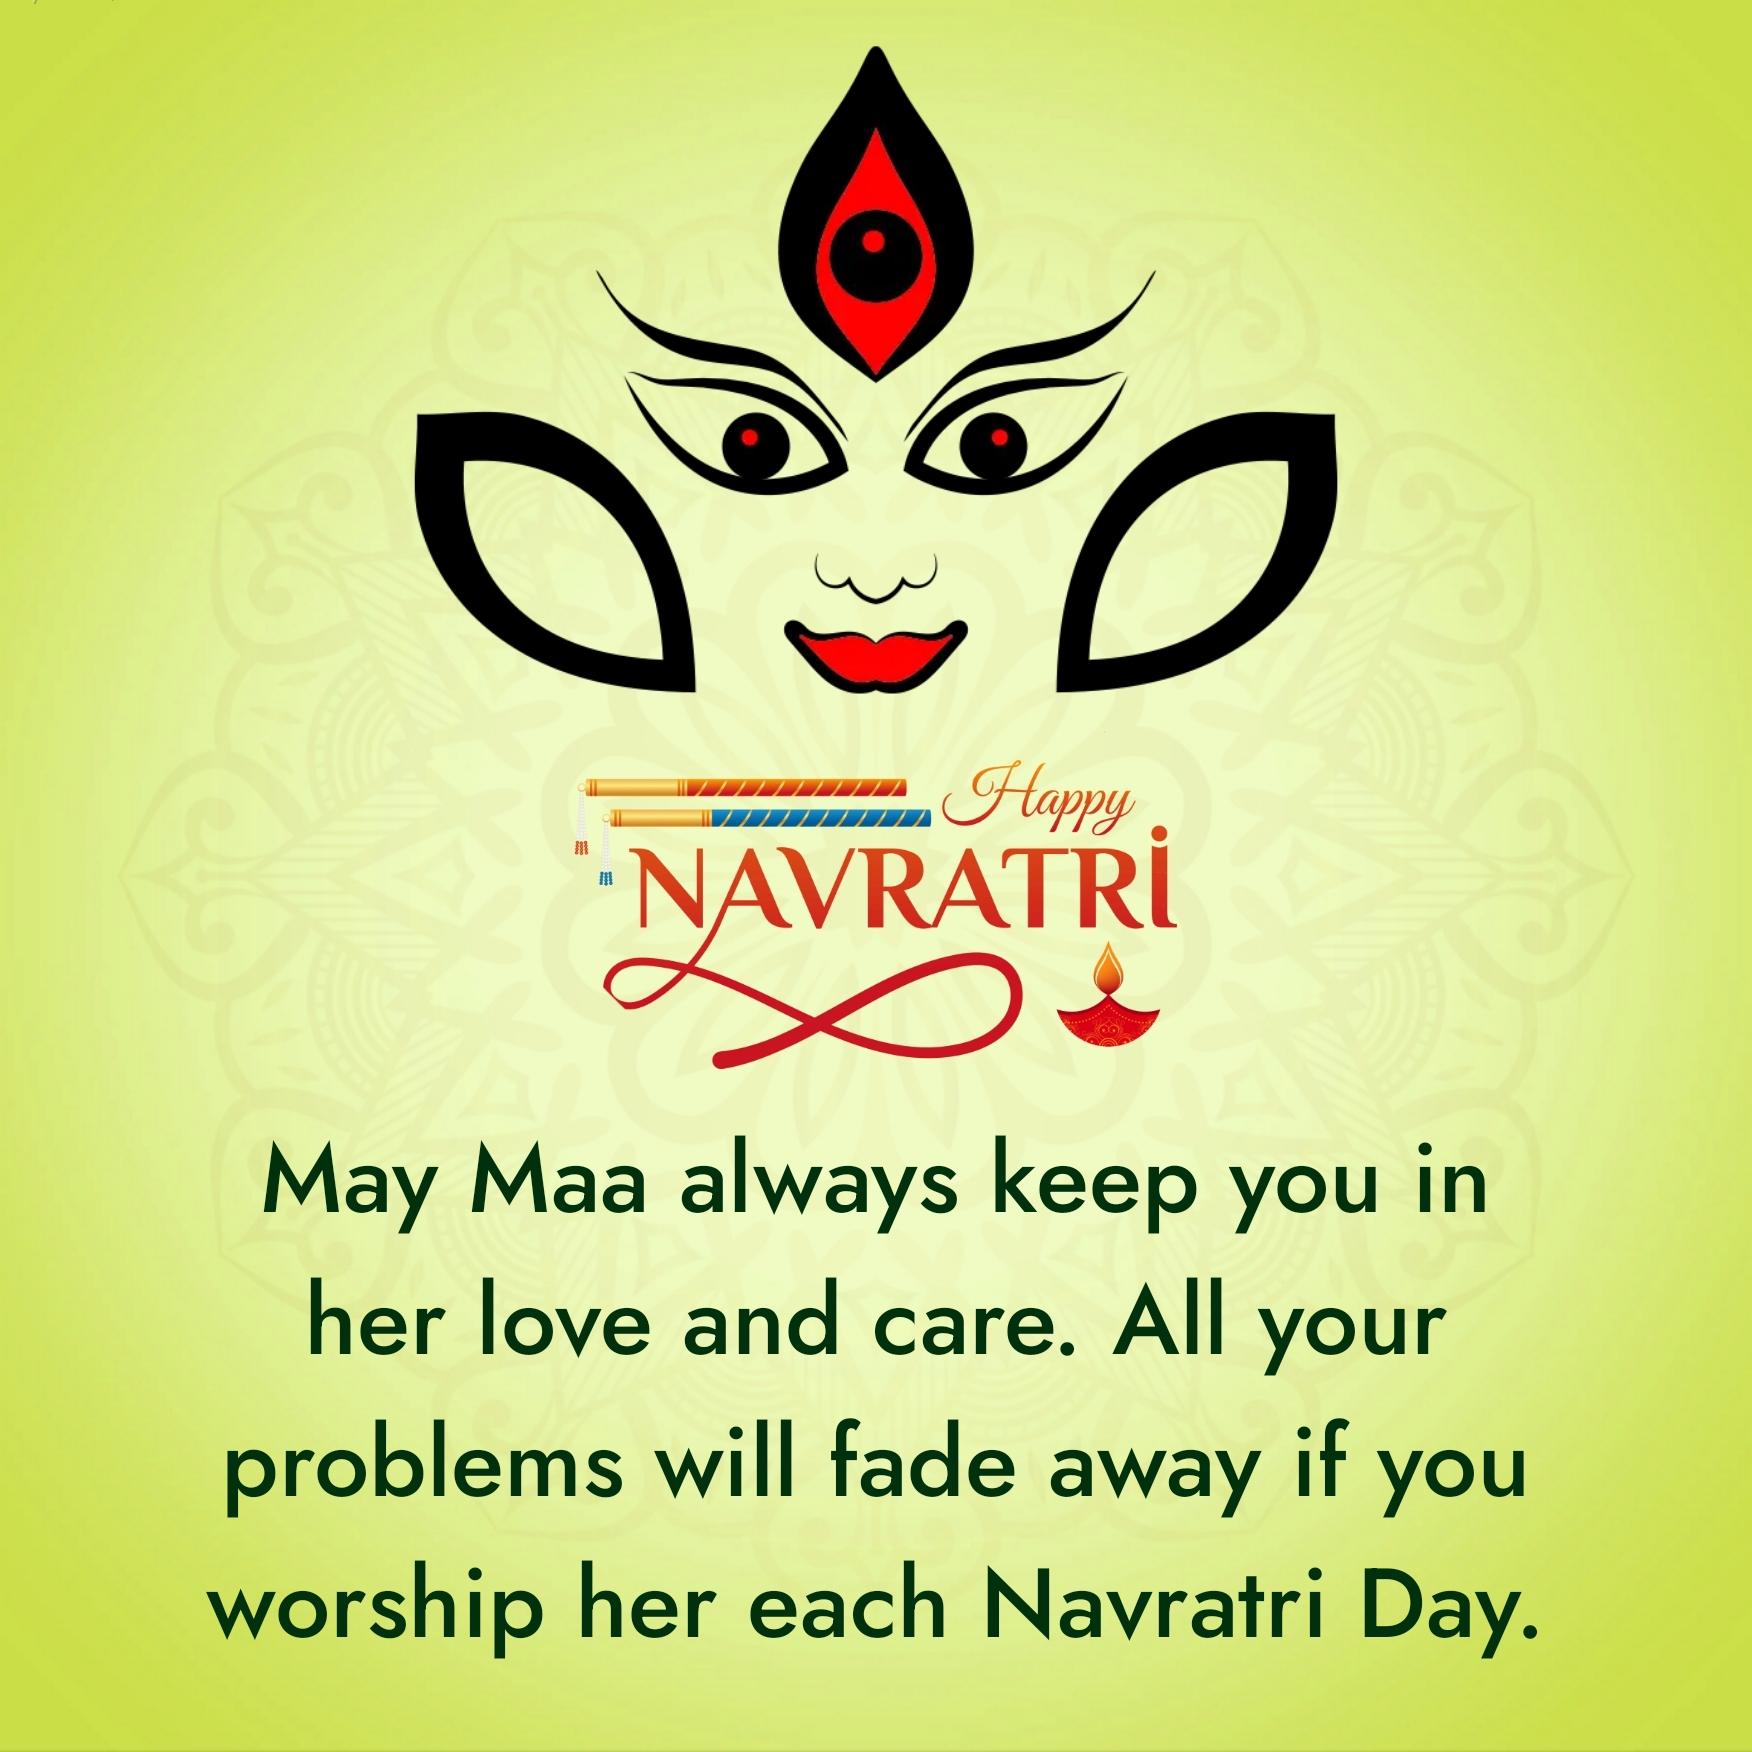 May Maa always keep you in her love and care